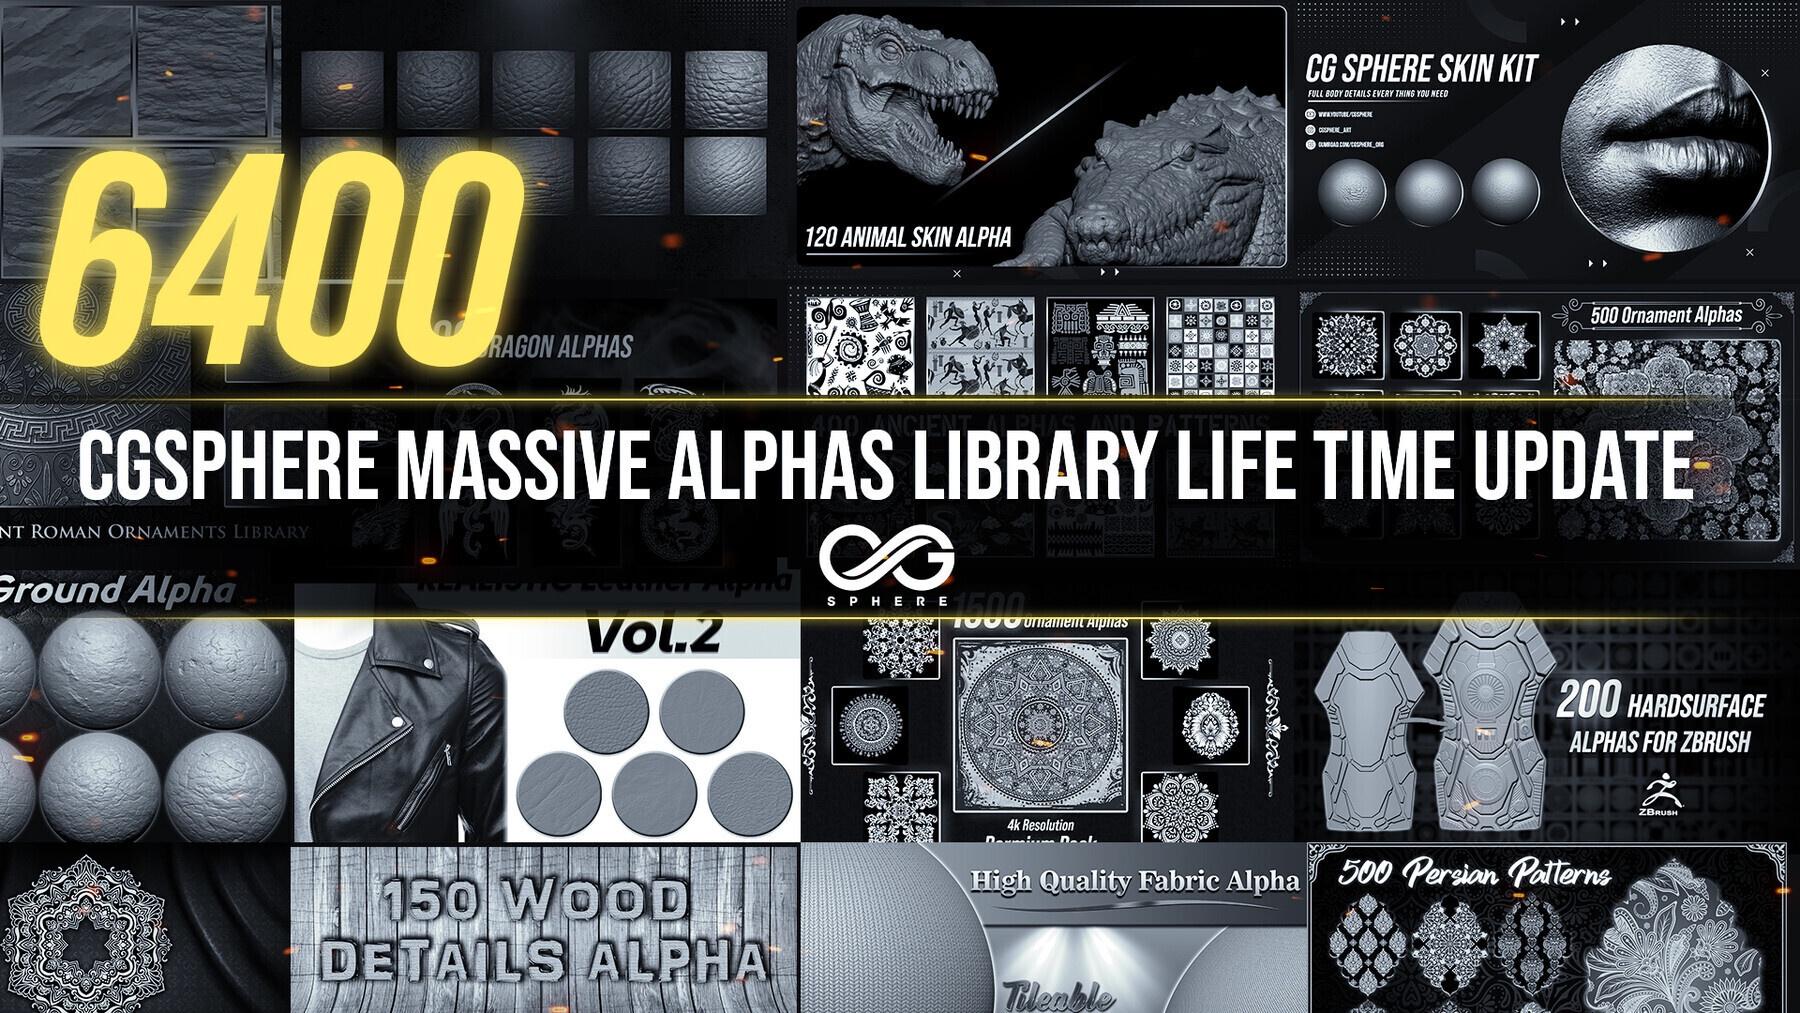 CGSphere Mega Bundle - 8250 Alphas and Brushes For Zbrush